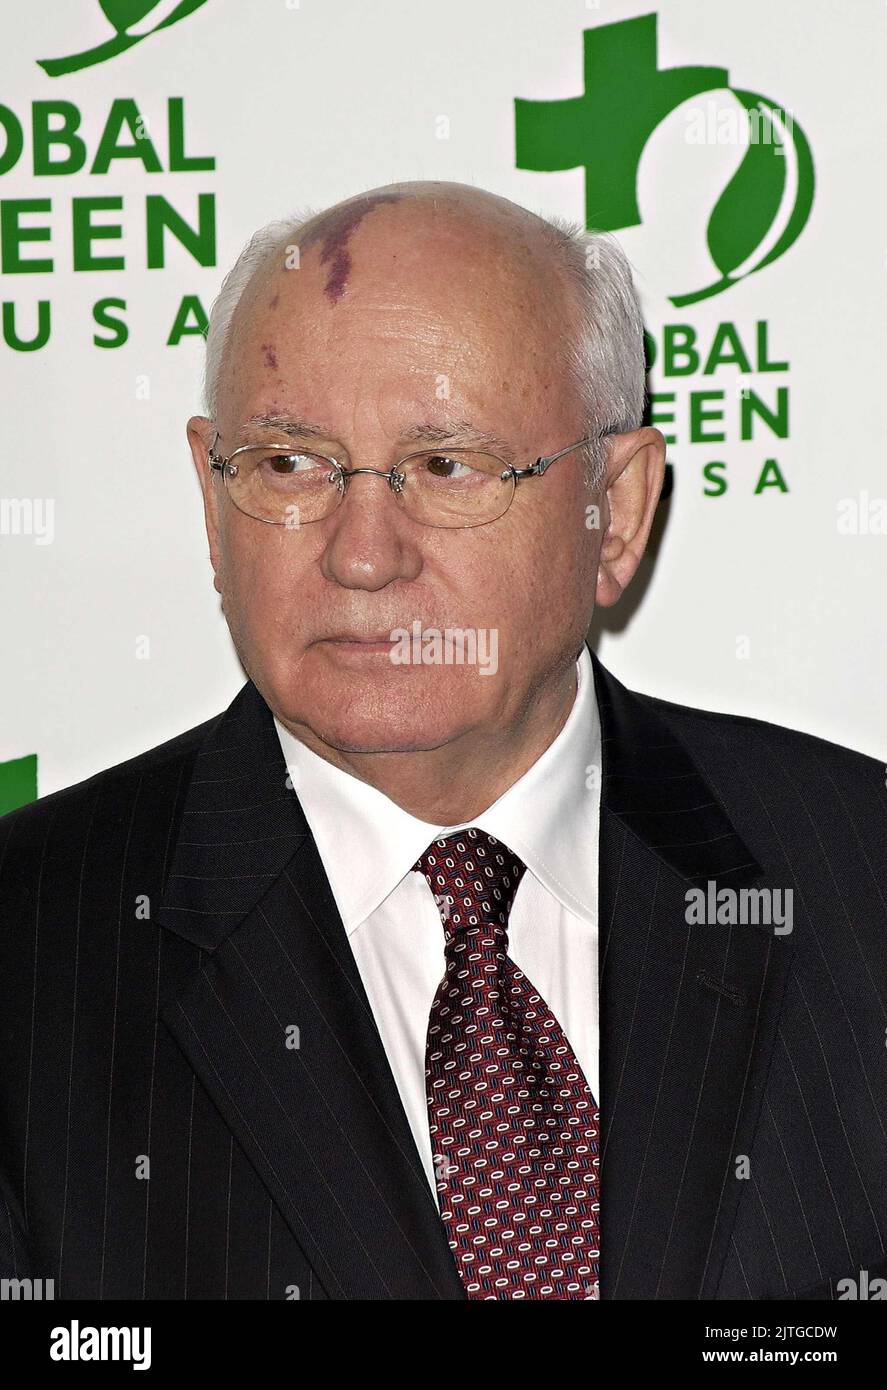 Beverly Hills, California, USA. 15th Apr, 2005. Mikhail Gorbachev. Mikhail Gorbachev and Global Green Announce Awards for Contribution to the Environment at the Beverly Hills Hotel. Photo Credit: Giulio Marcocchi/Sipa Press/0504181900 Credit: Sipa USA/Alamy Live News Stock Photo